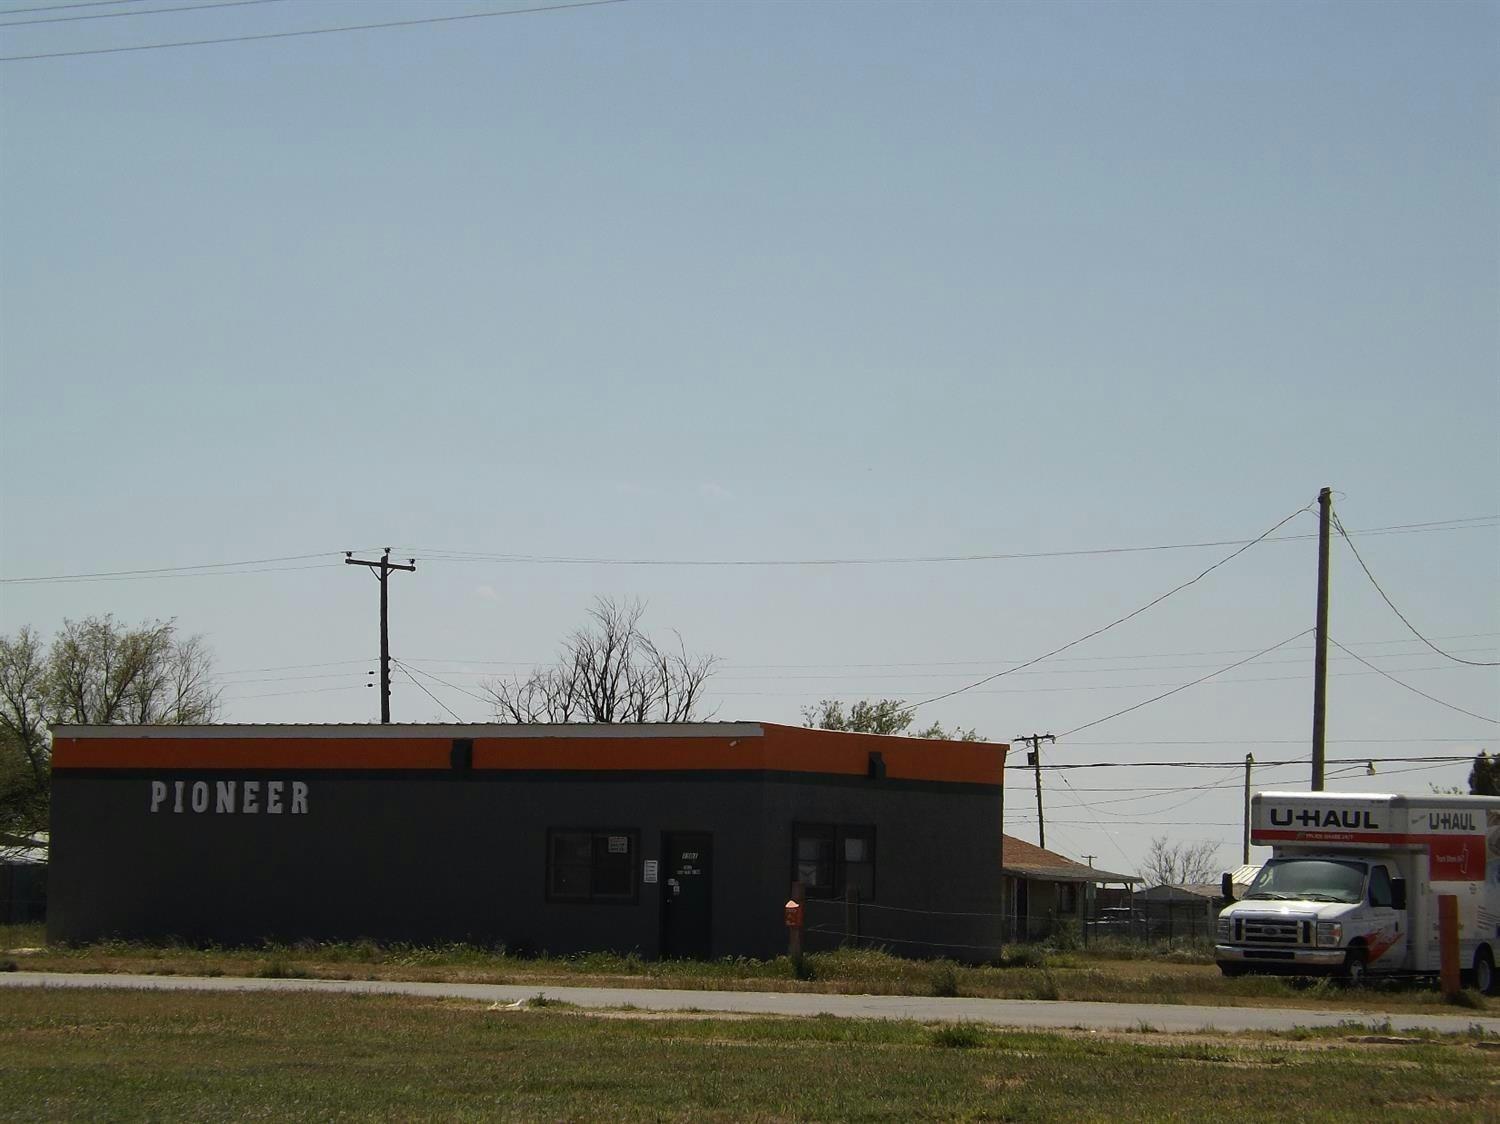 Excellent business opportunity in Ralls, TX to own a fenced RV Park with 16 slots (and room for expansion) with a 500 sf mobile home (suitable for office), and a 1000 building (potential laundry) in great location convenient to local grocery store, restaurants, shopping, etc.